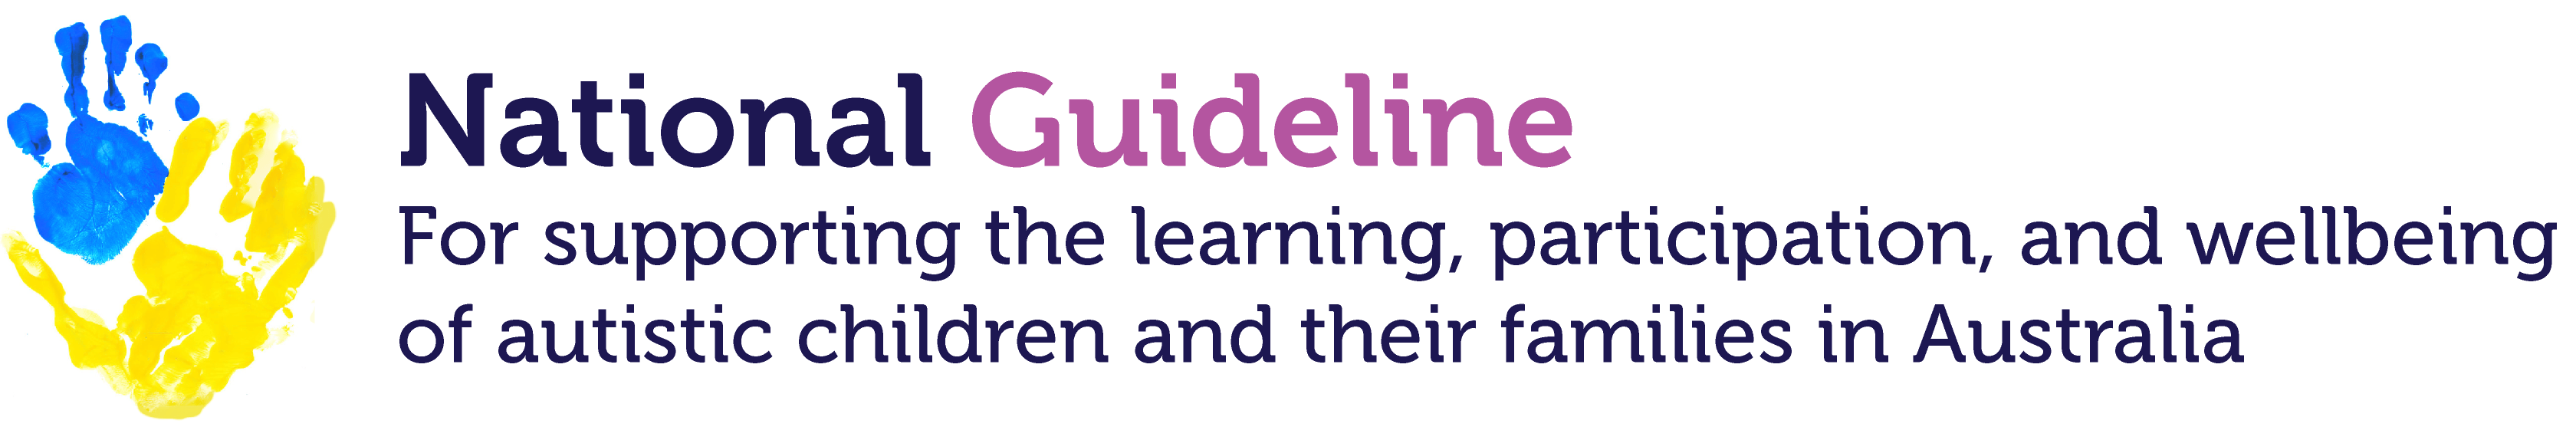 National Guideline - For supporting the learning, participation and wellbeing of autistic children and their families in Australia